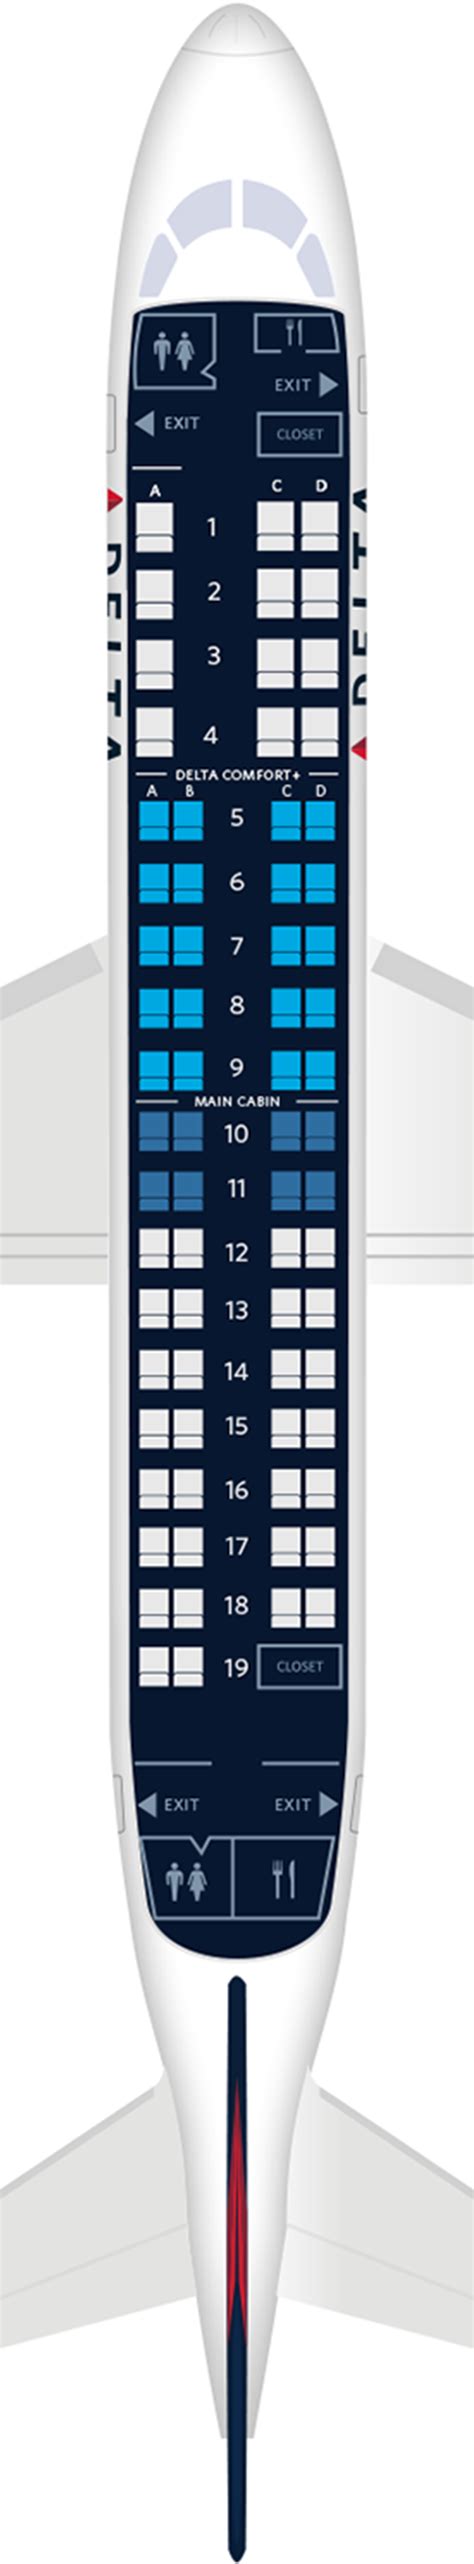 Embraer e 175 seating chart. Things To Know About Embraer e 175 seating chart. 